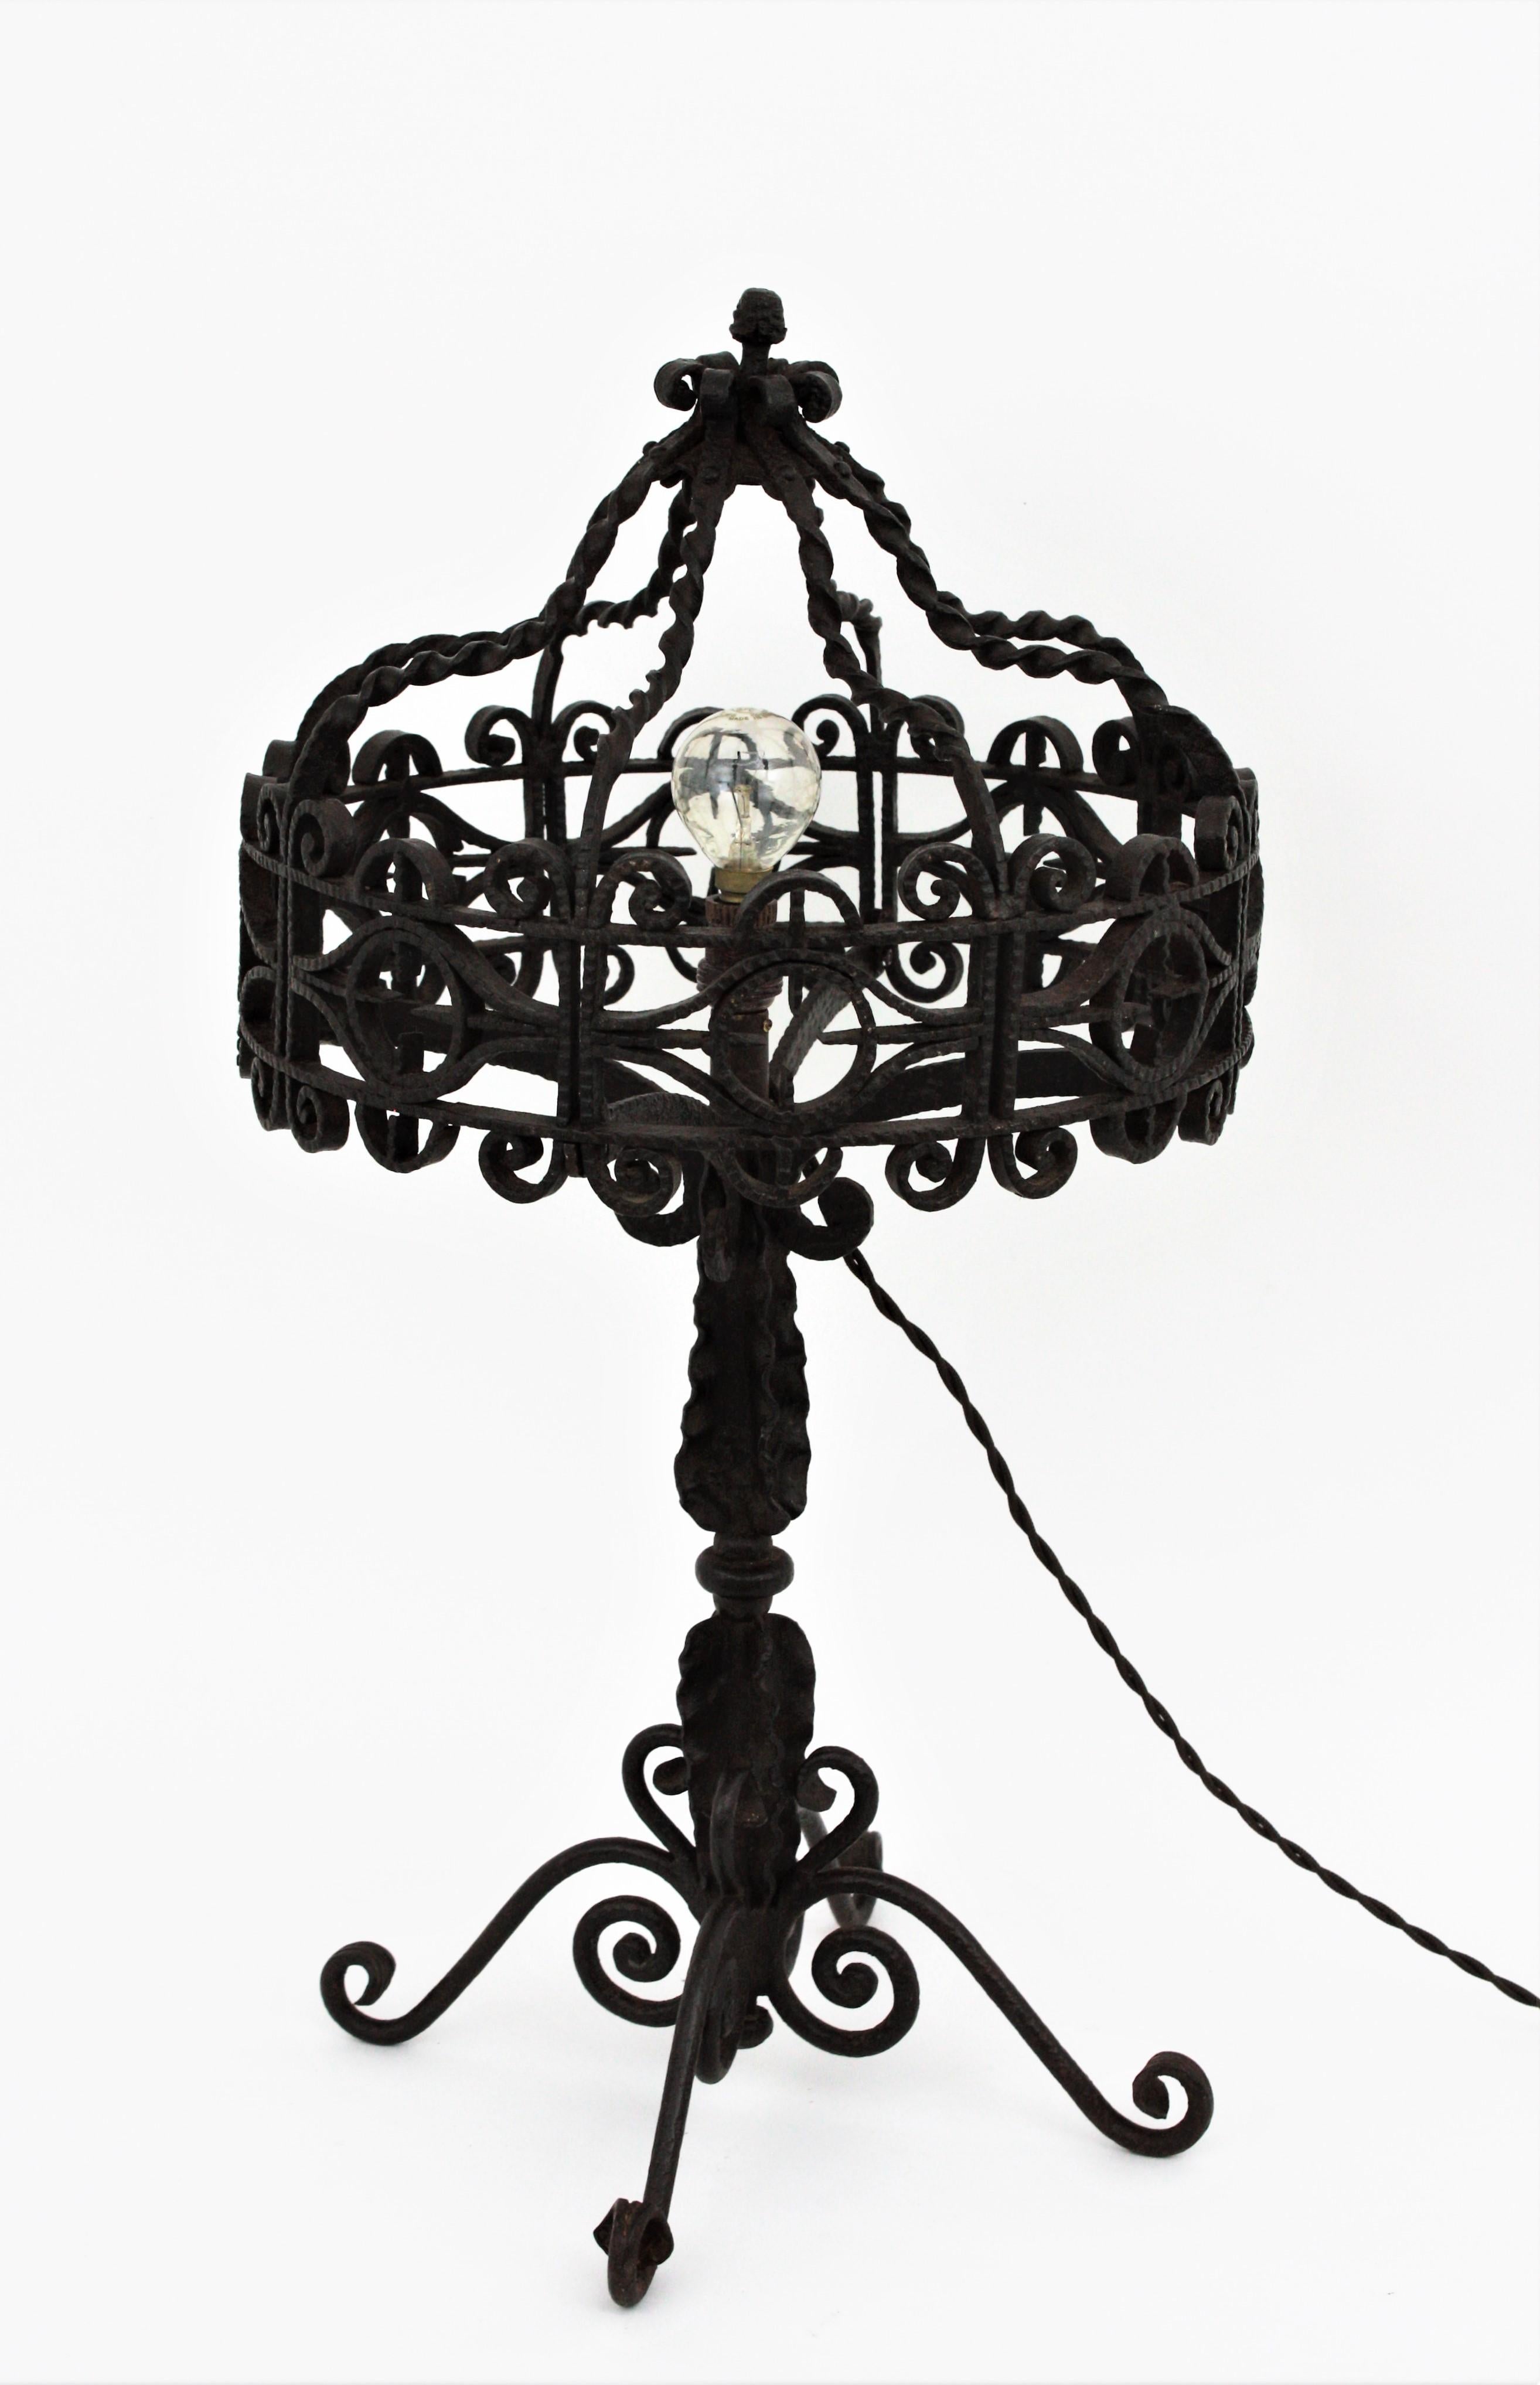 Gorgeous Spanish Gothic revival scrollwork wrought iron table lamp
This handwrought iron table lamp with has an stunning handmade work with scrolled details and twisted ornamentations thorough.
It will be a nice addition wherever you place it and it